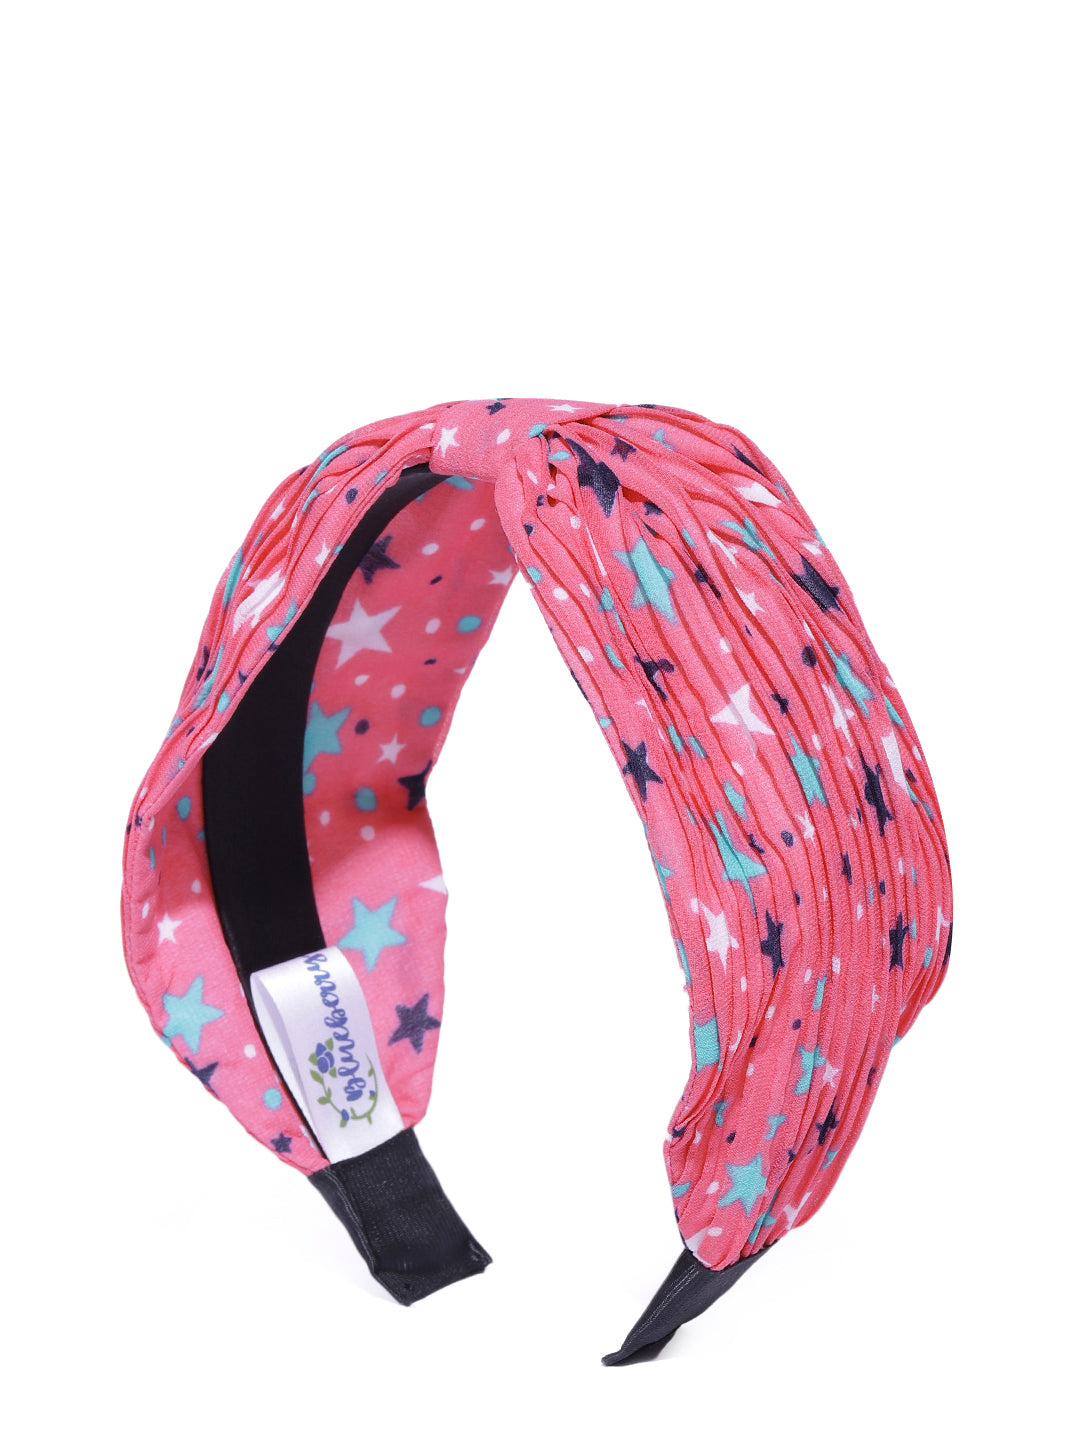 Blueberry printed knot pink hairband